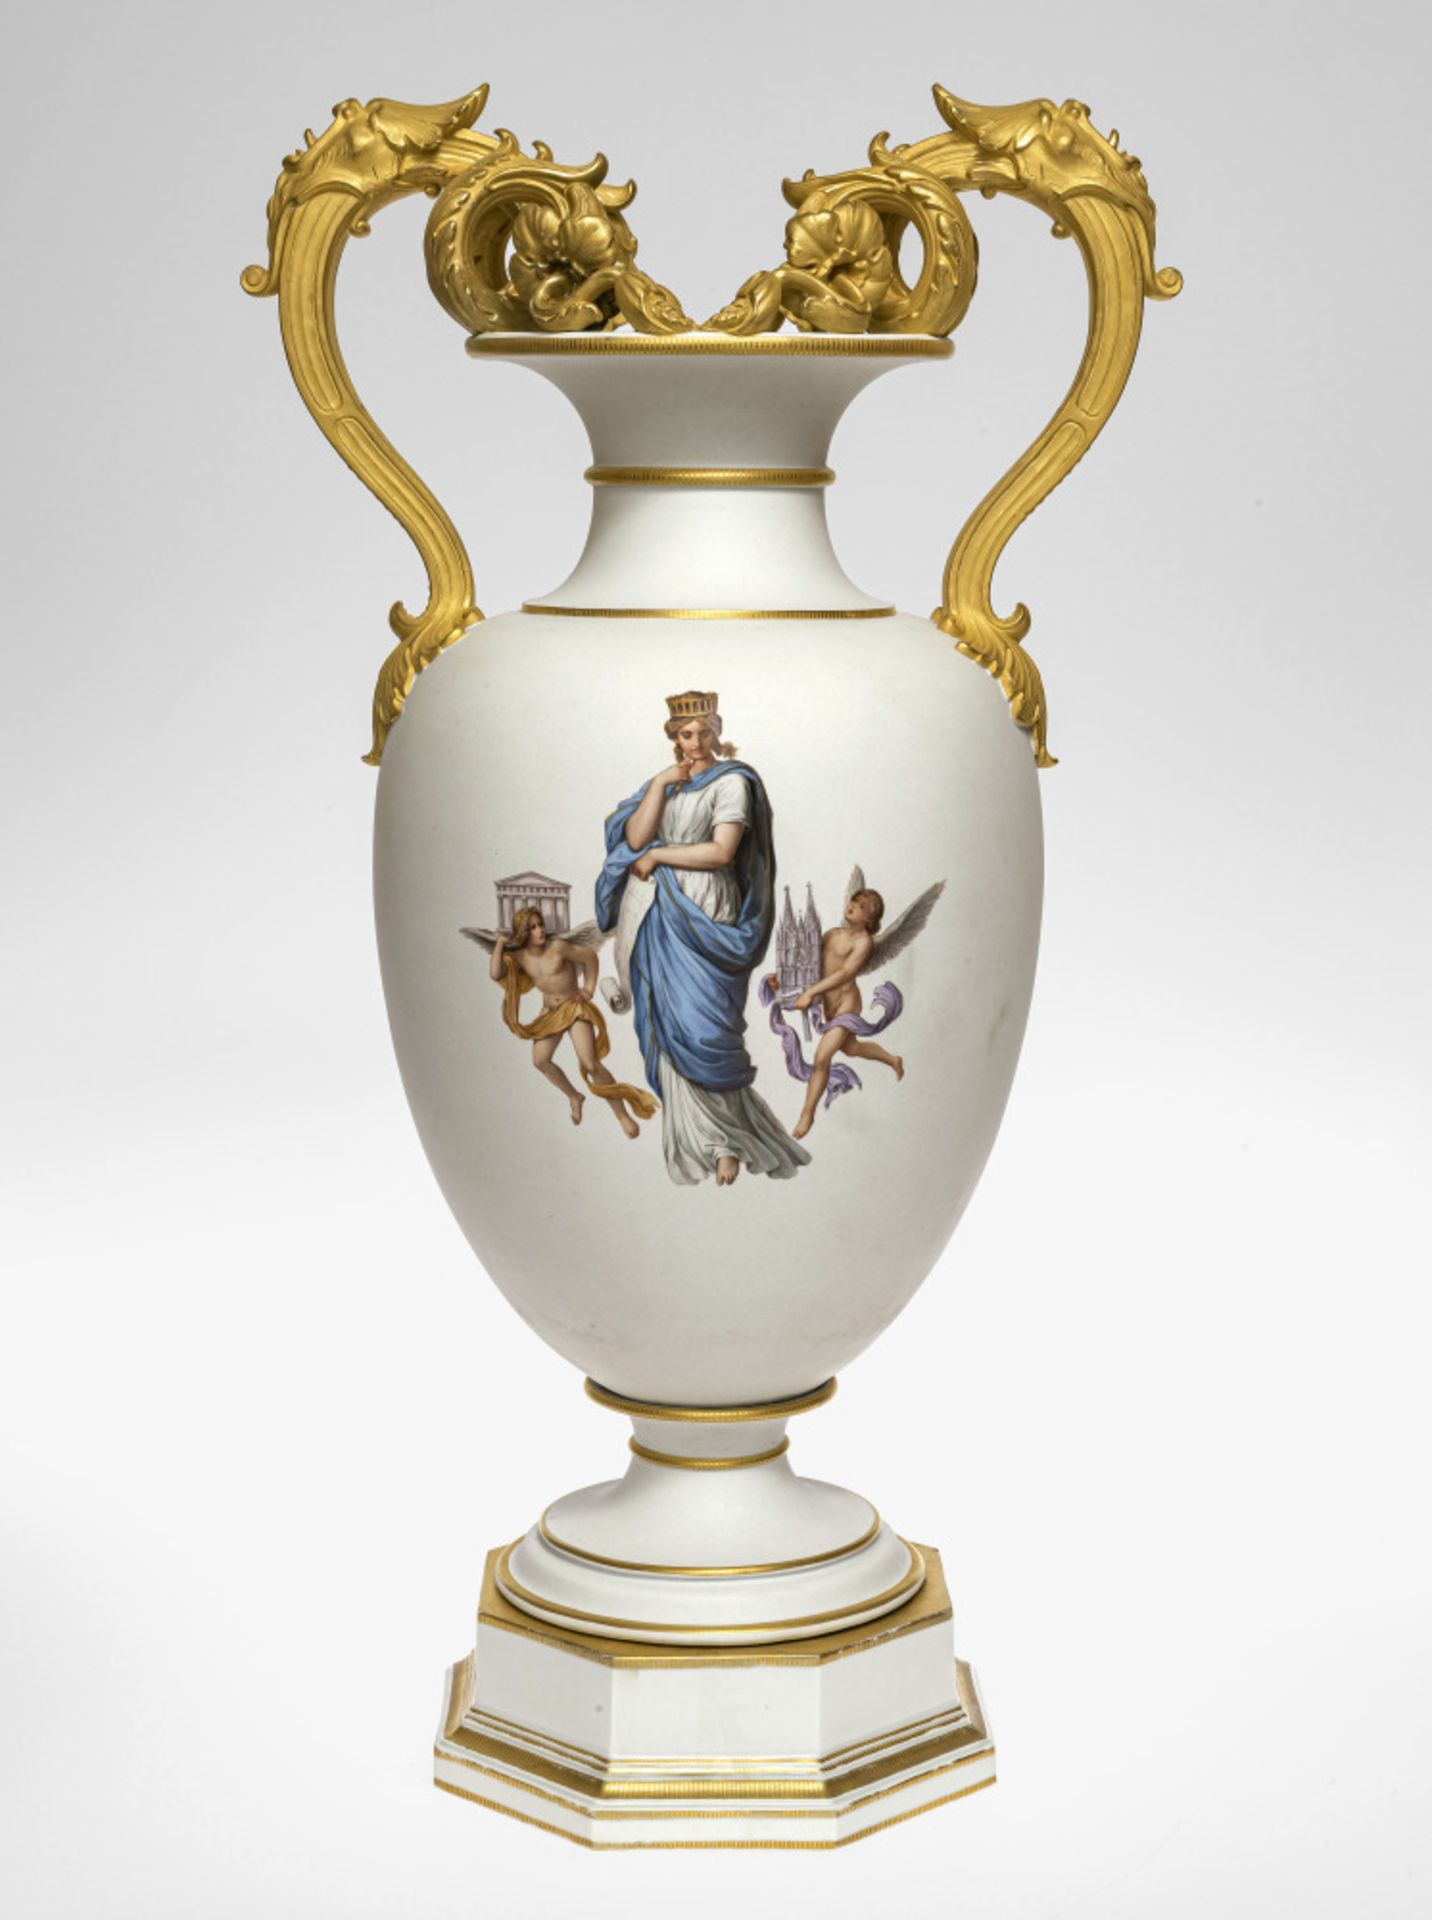 A magnificent vase with the allegory of architecture - KPM Berlin, circa 1860, model by Julius W. Ma